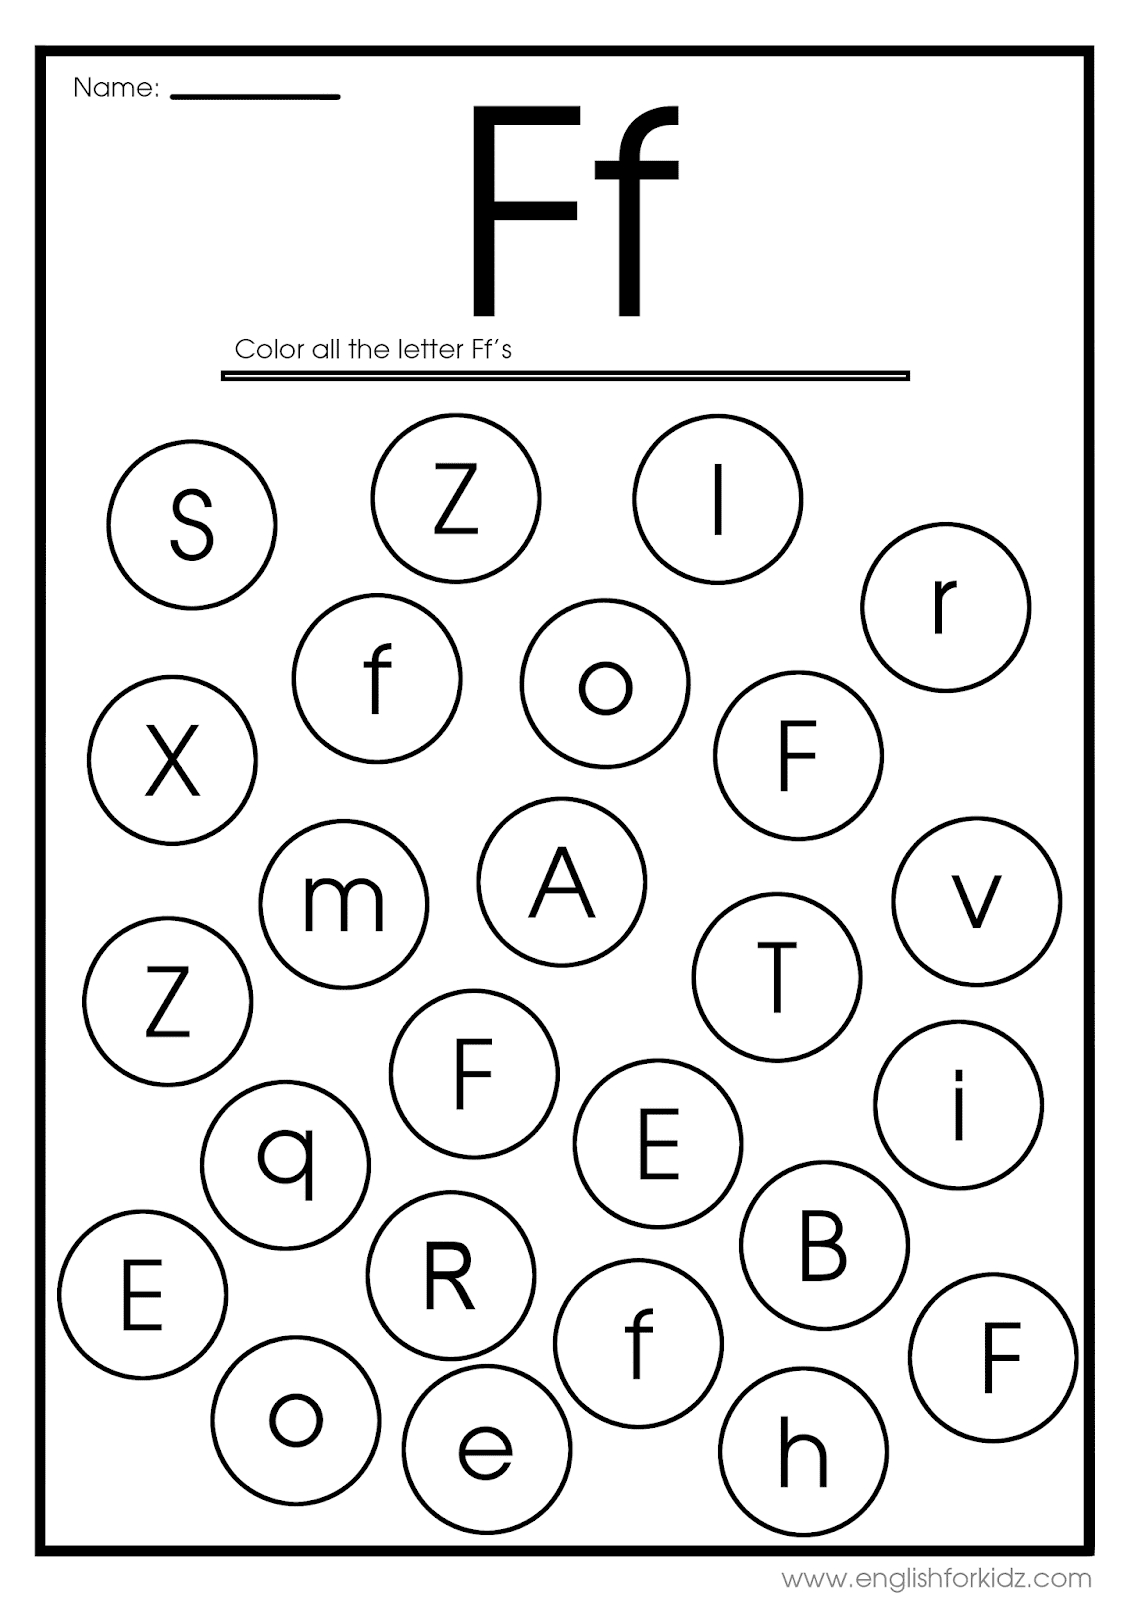 Letter F Worksheets, Flash Cards, Coloring Pages with Letter F Worksheets Coloring